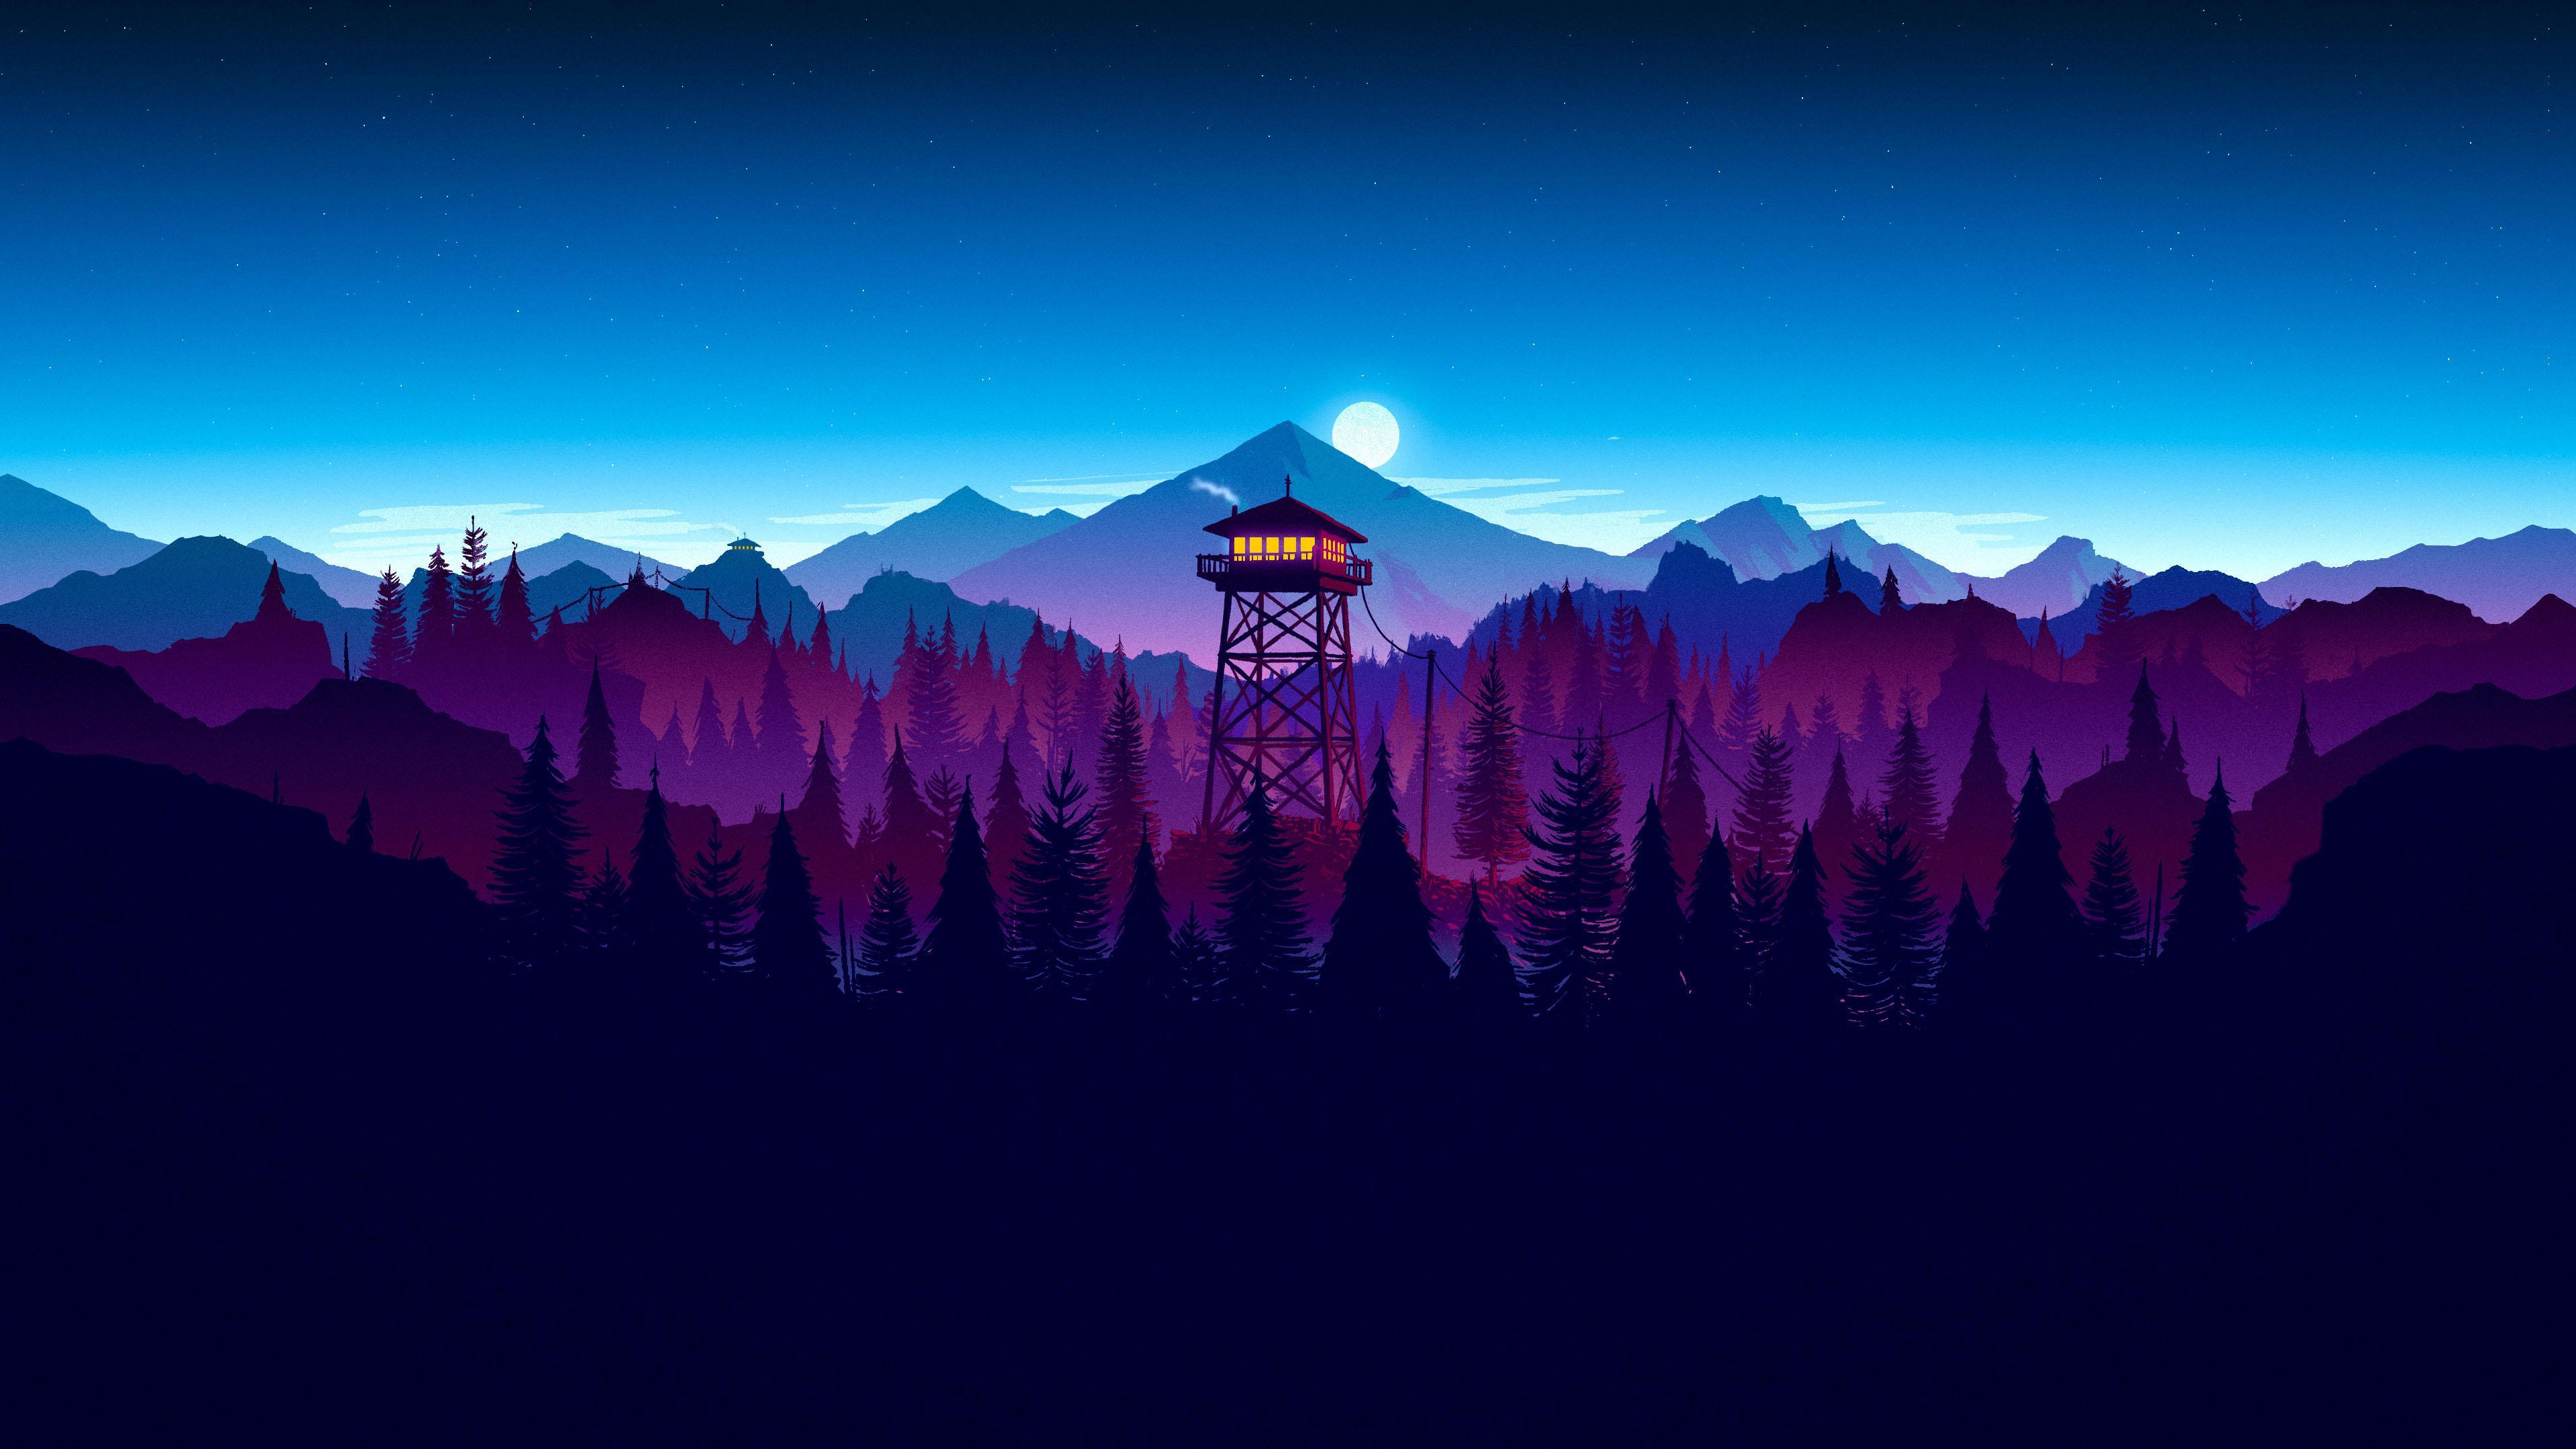 firewatch 4K wallpaper for your desktop or mobile screen free